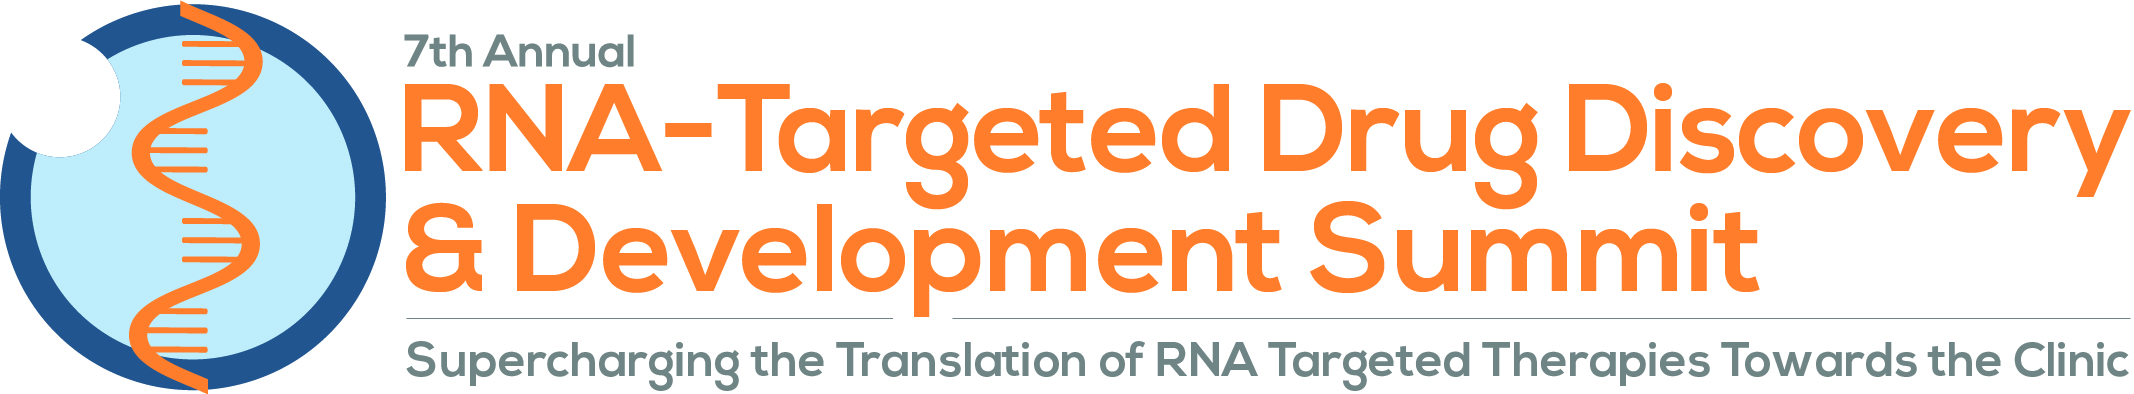 7th RNA-Targeted Drug Discovery Summit logo Col Tag